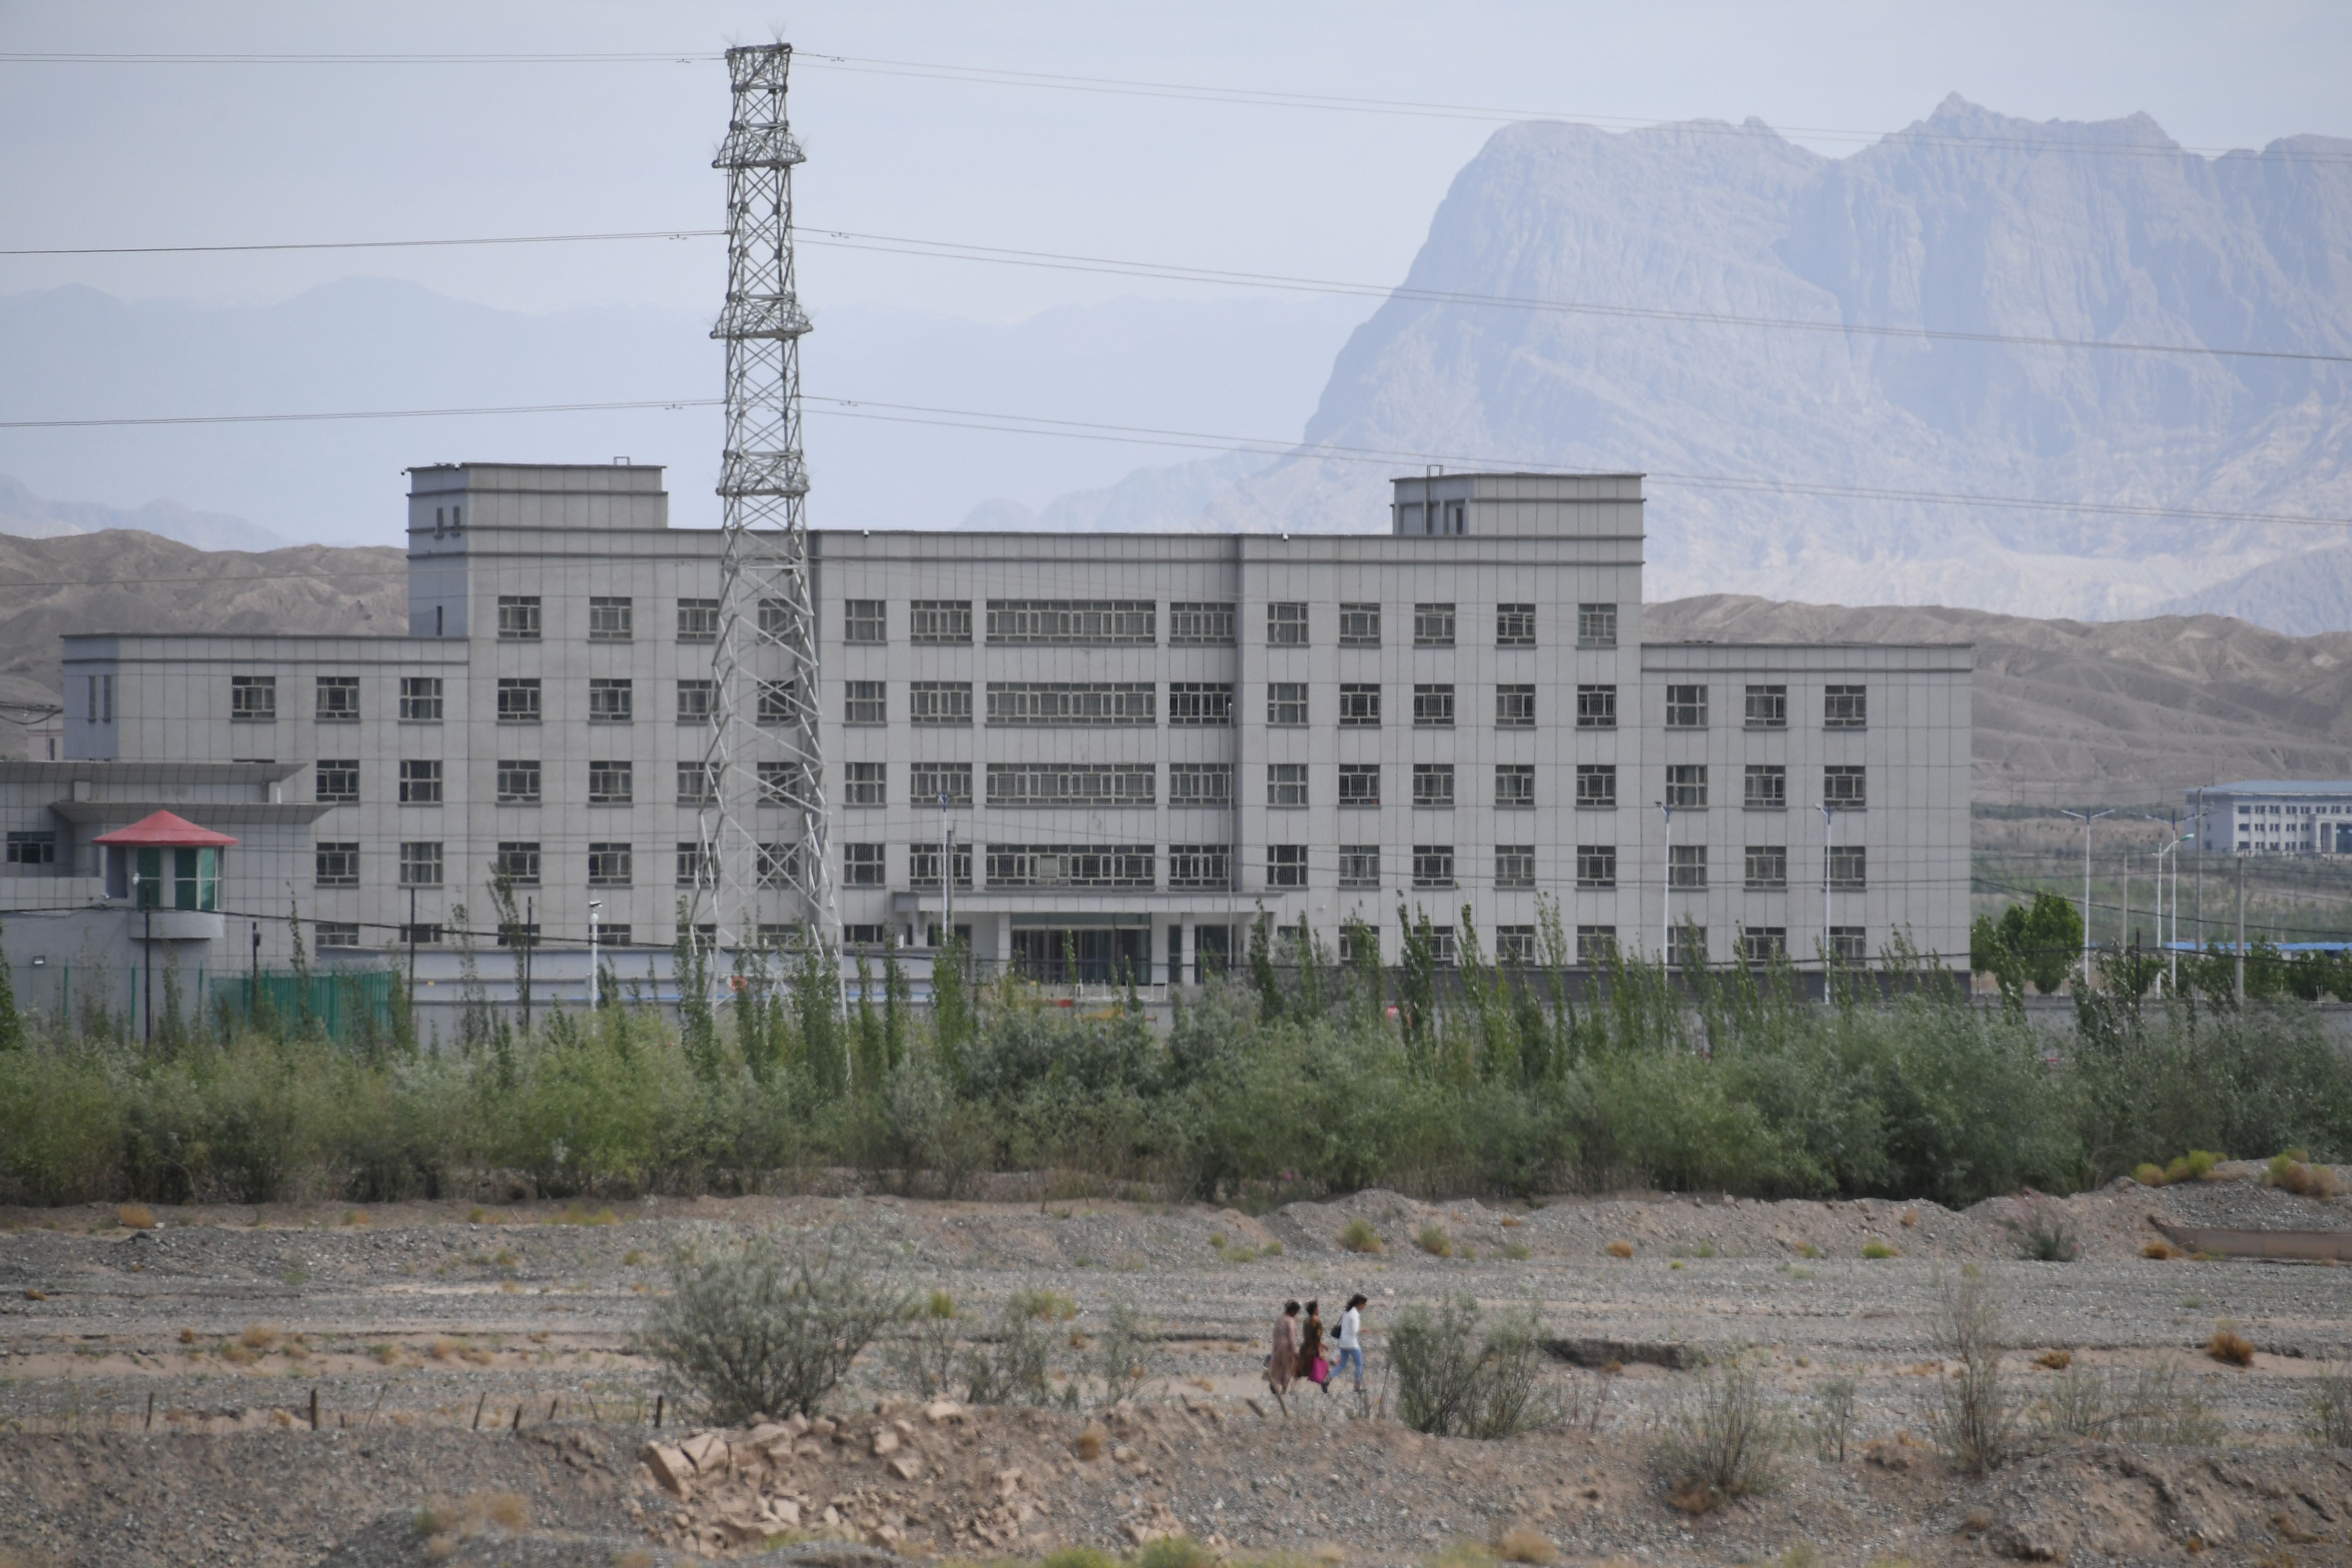 This photo taken on June 2, 2019 shows a facility believed to be a re-education camp where mostly Muslim ethnic minorities are detained, in Artux, north of Kashgar in China's western Xinjiang region. (GREG BAKER/AFP via Getty Images)